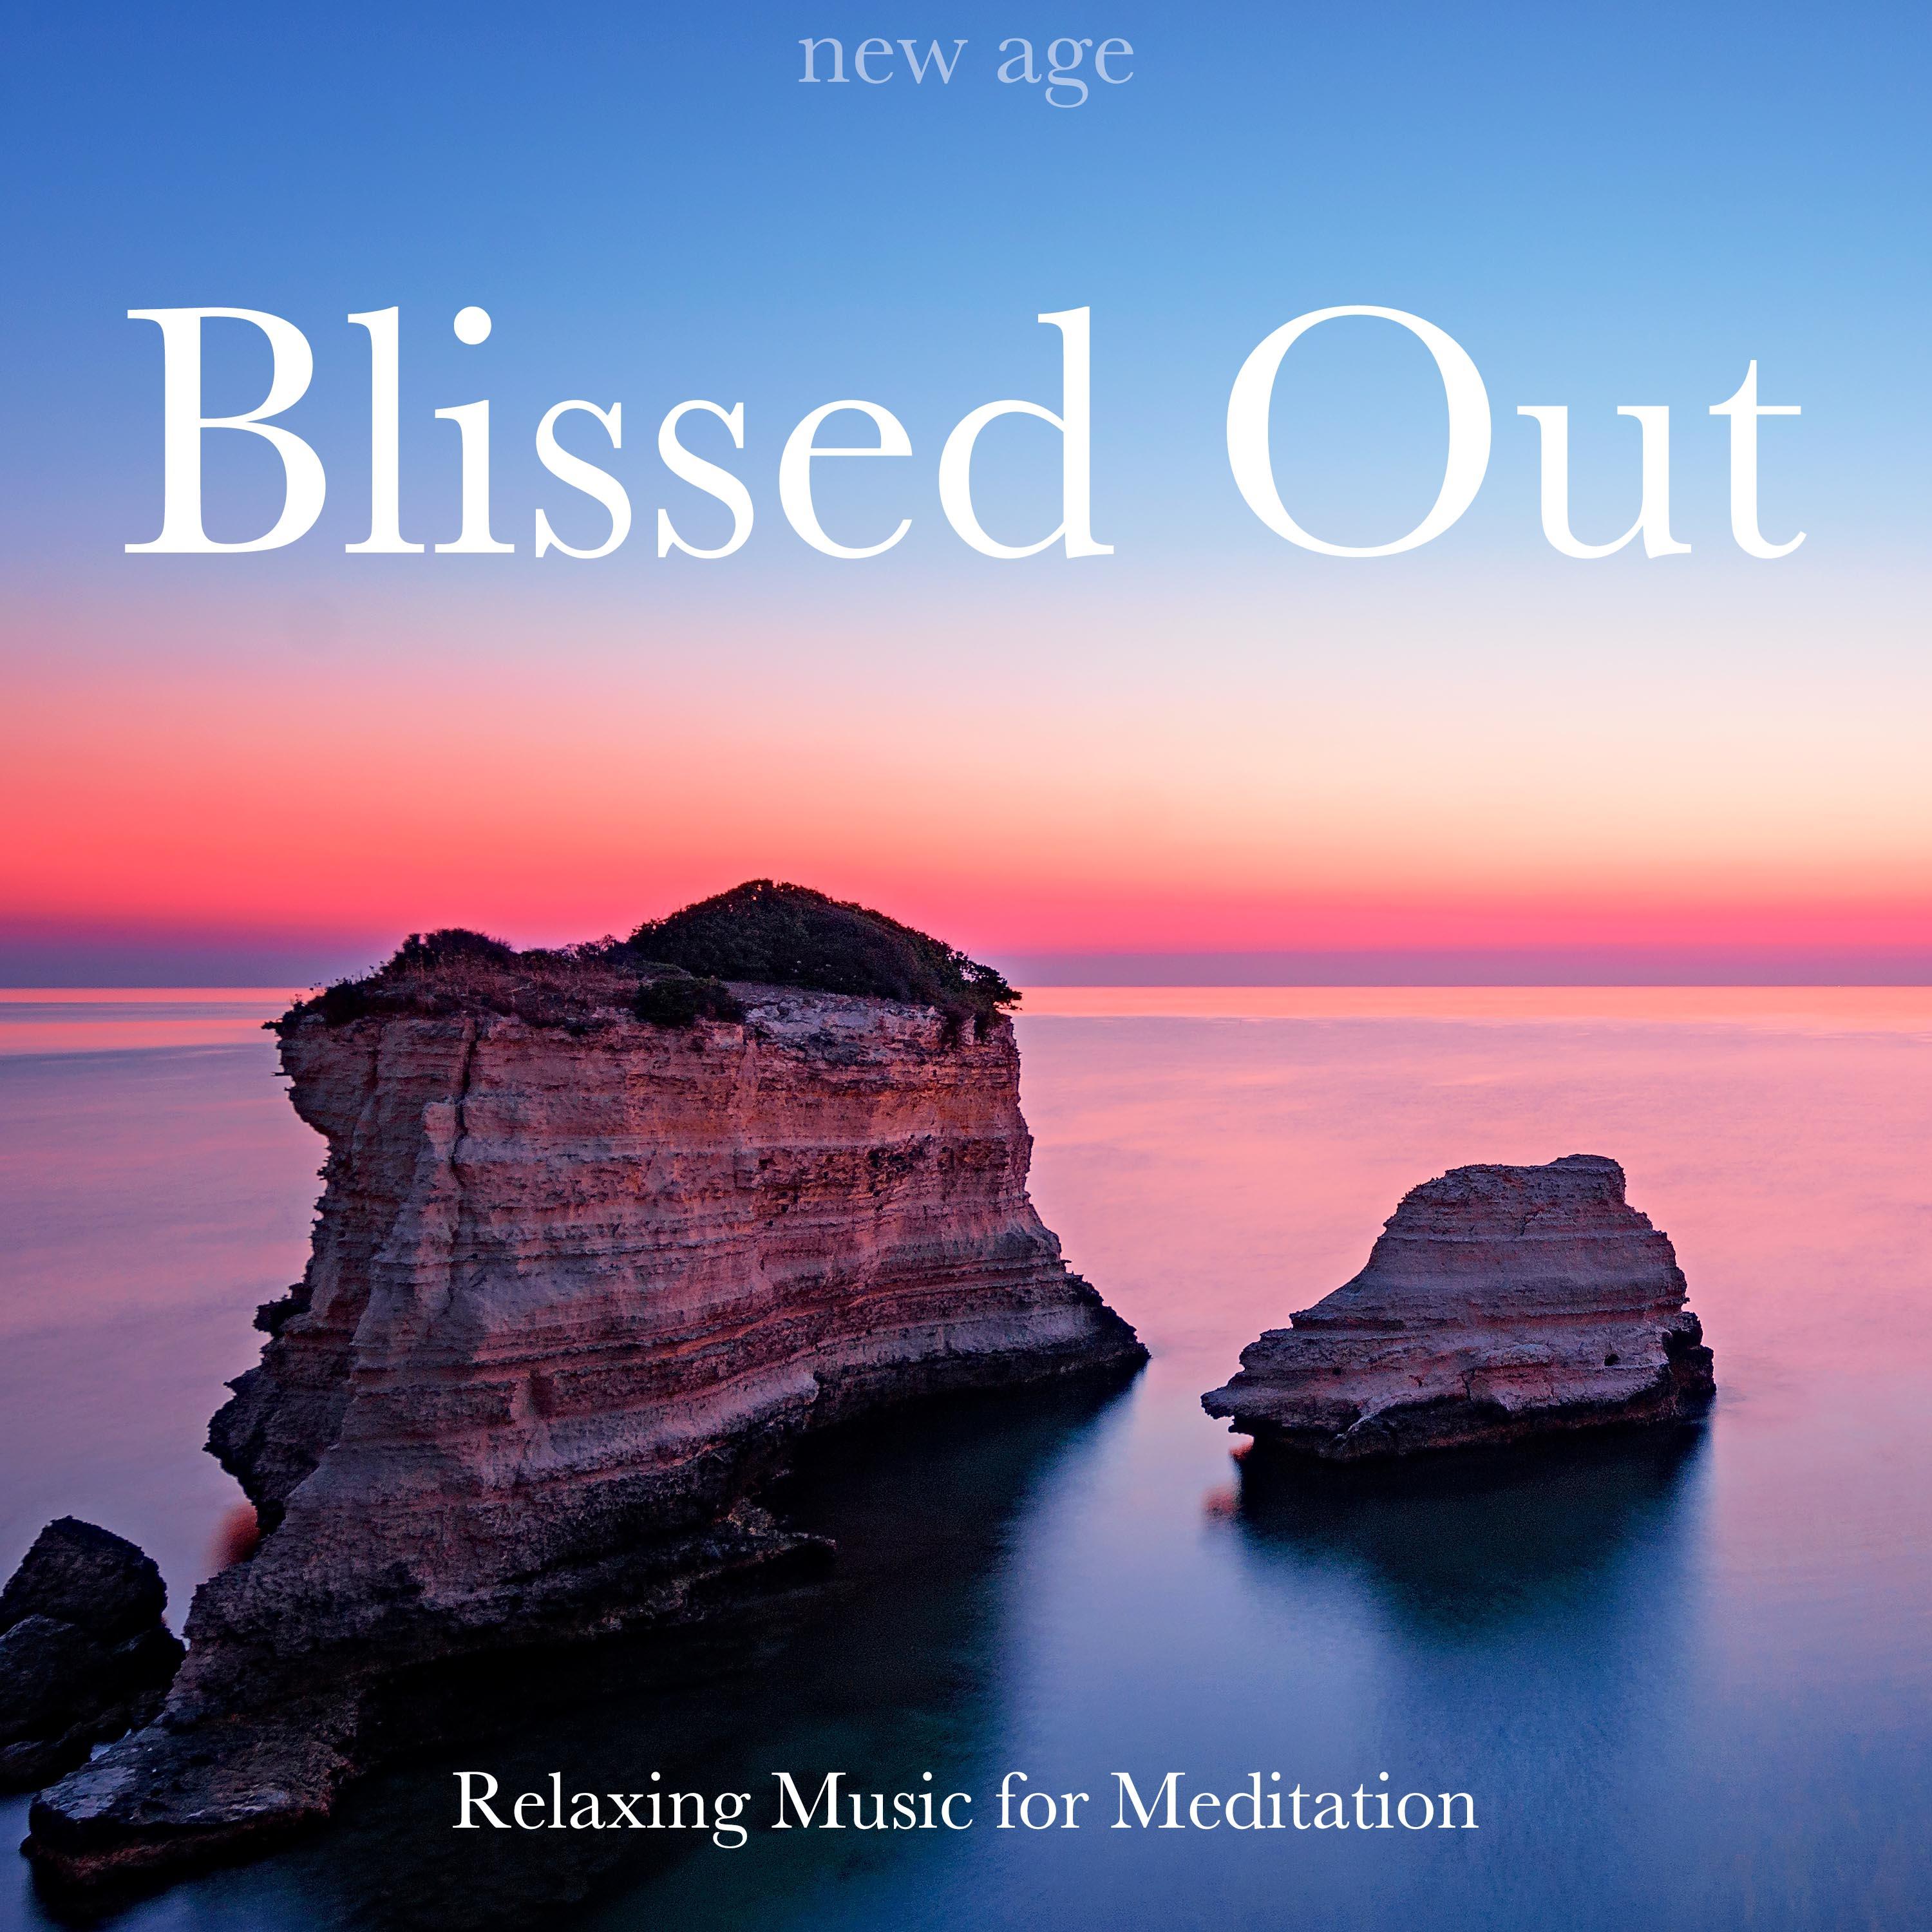 Blissed Out: Reflective, Thoughtful, Relaxing Music for Meditation, Yoga, Sleep